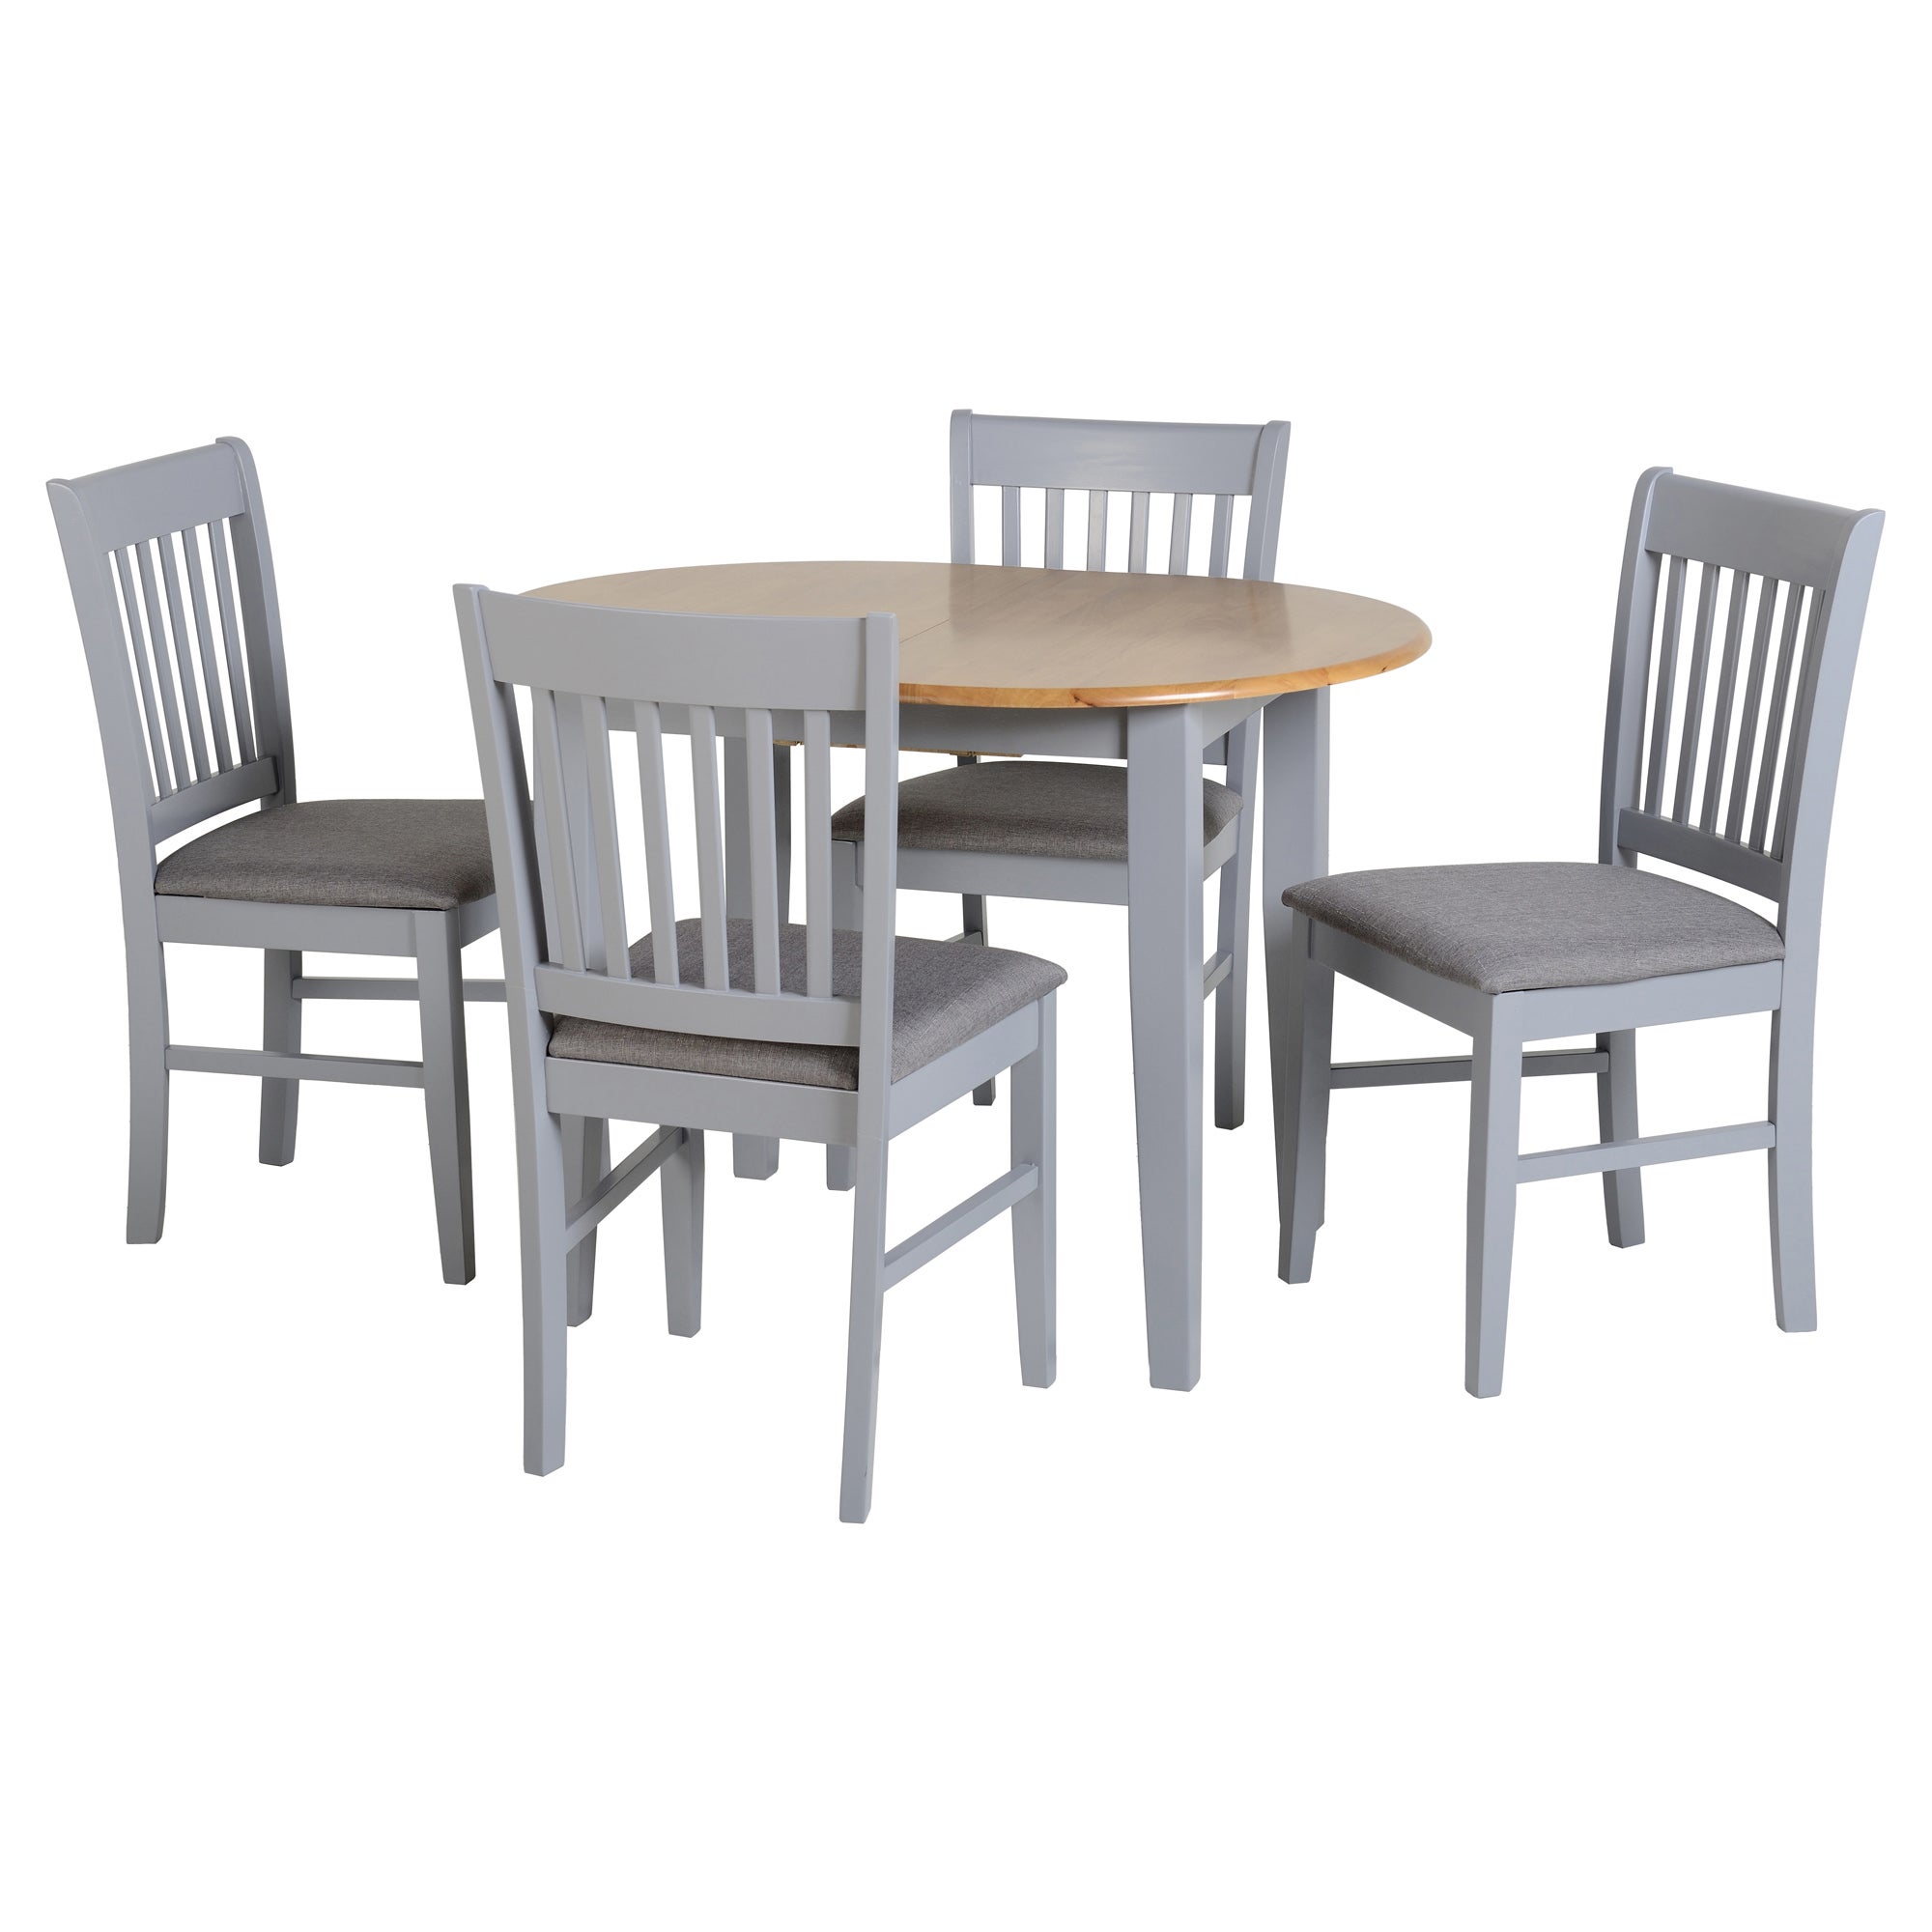 Oxford Oval Extendable Dining Table with 4 Chairs, Grey Grey